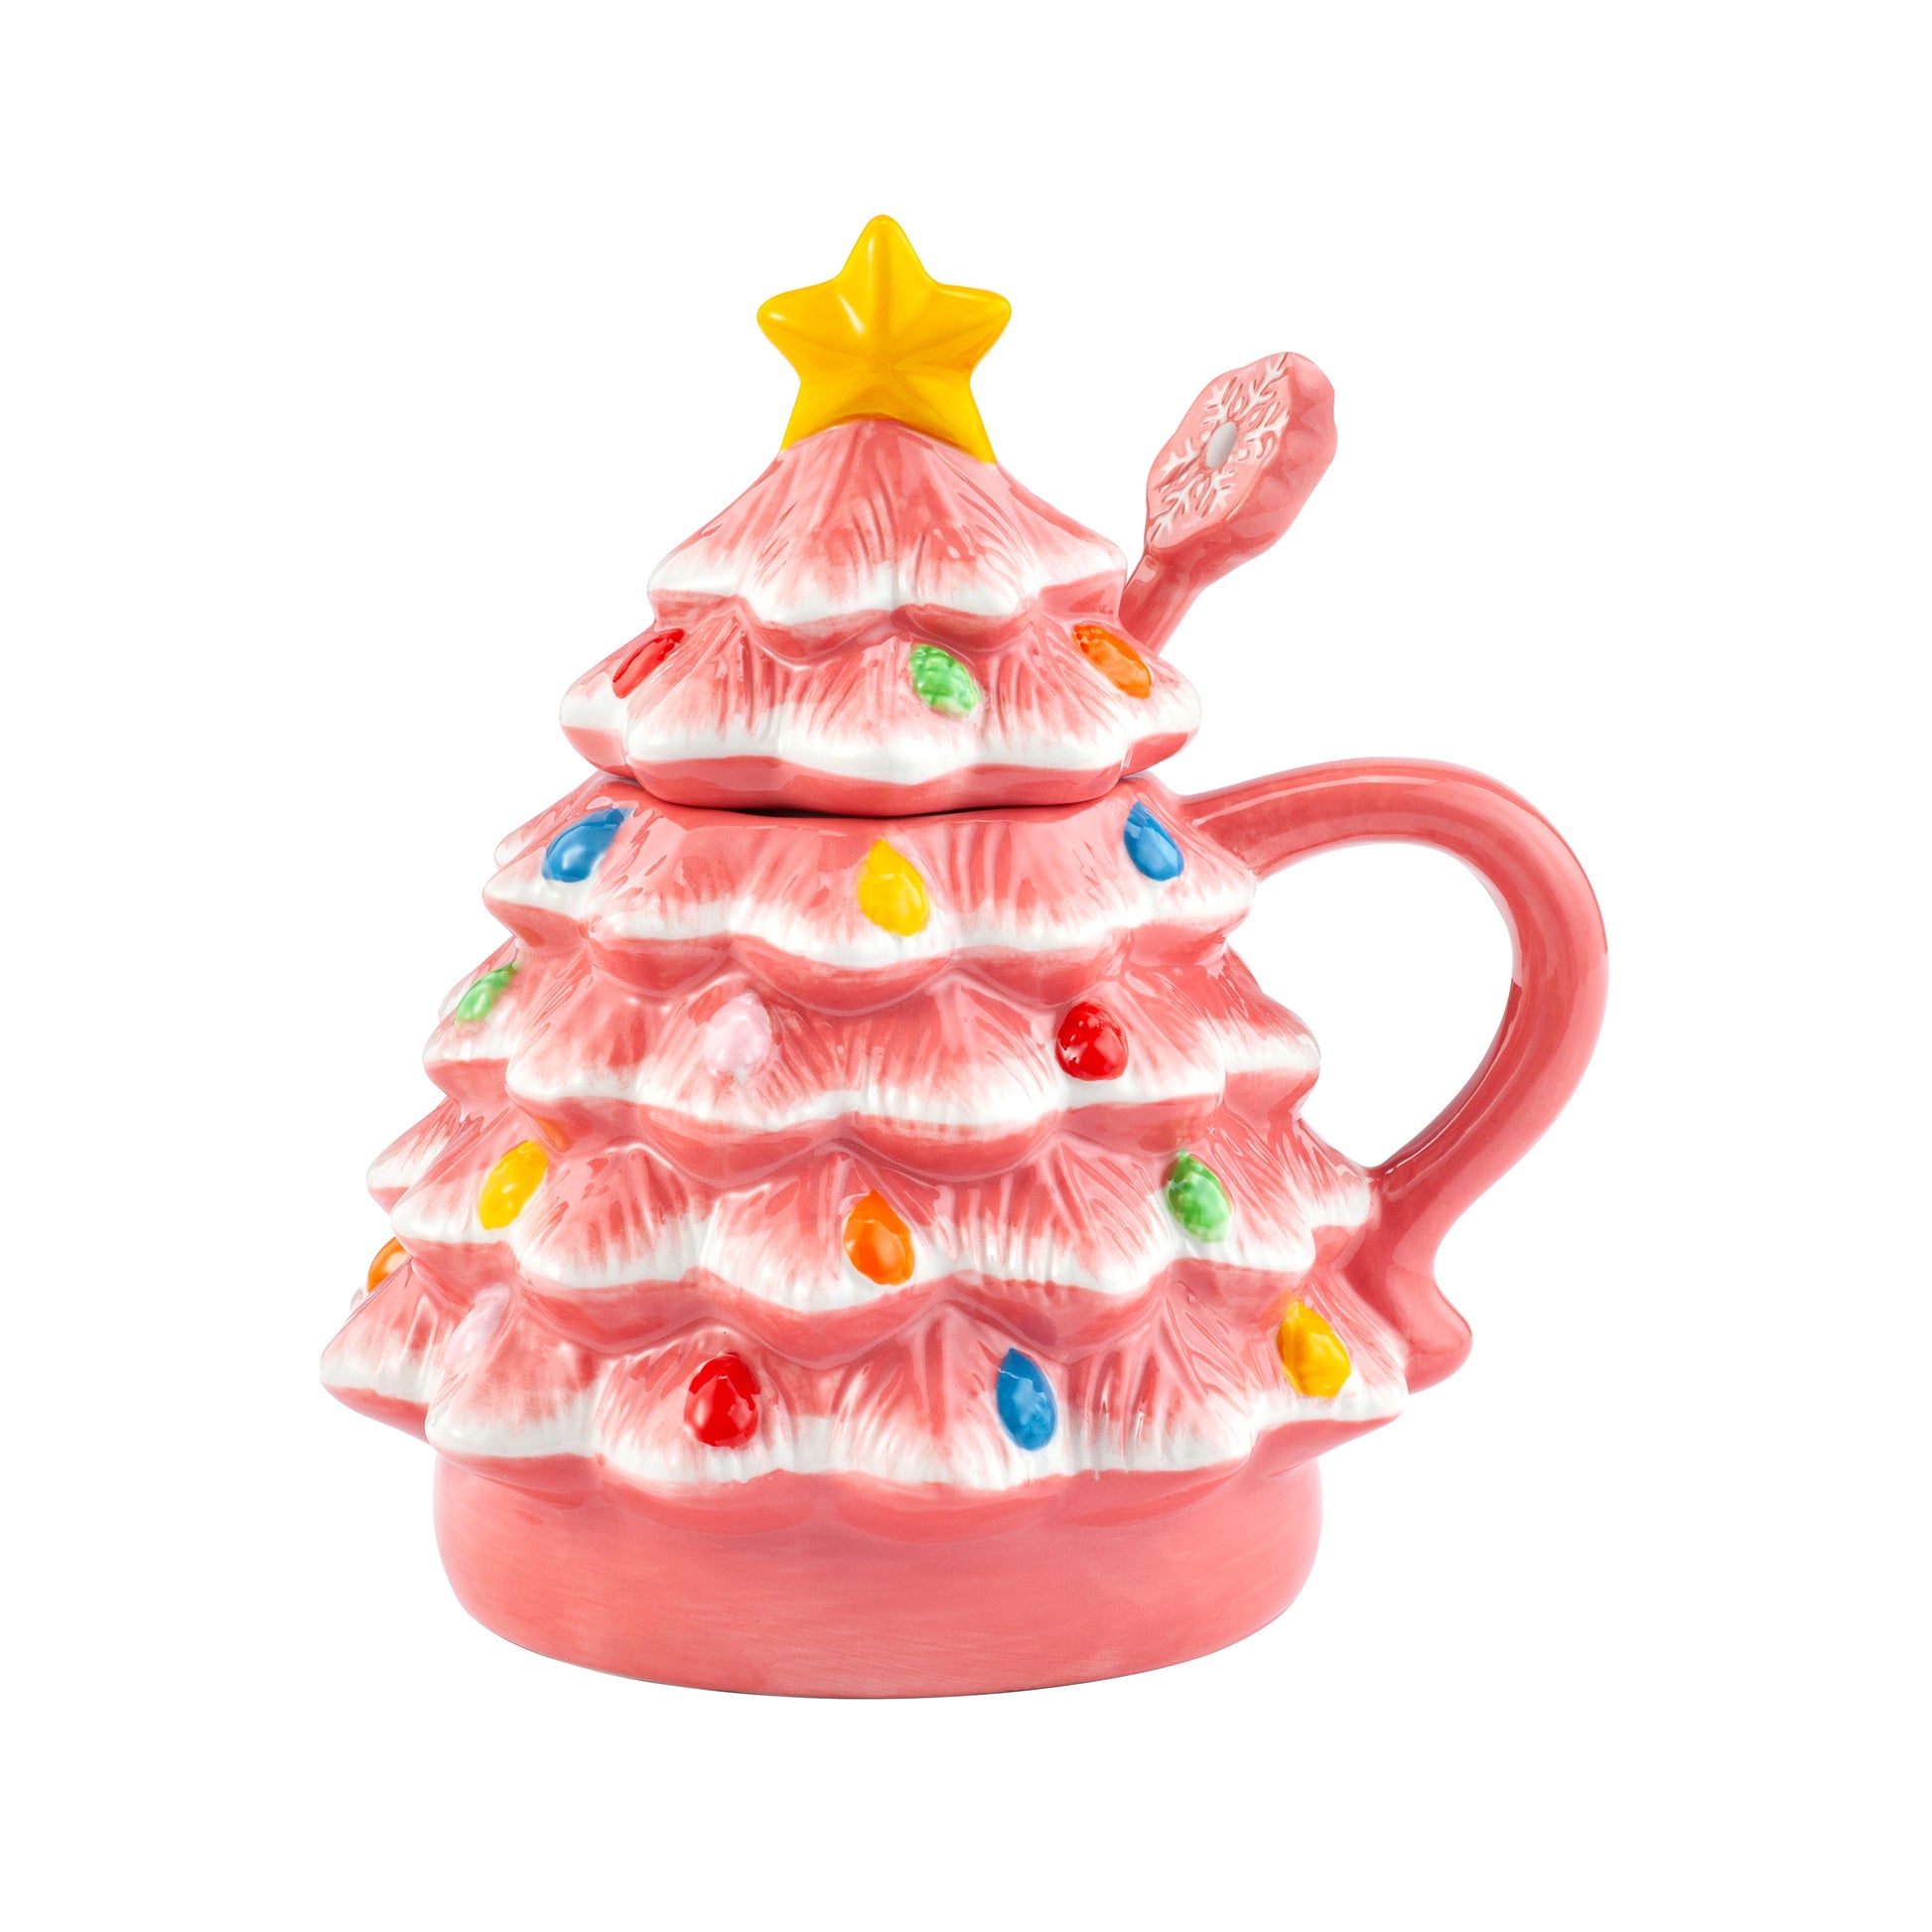 Target Is Selling Pink Ceramic Christmas Trees For An Adorably Retro Holiday